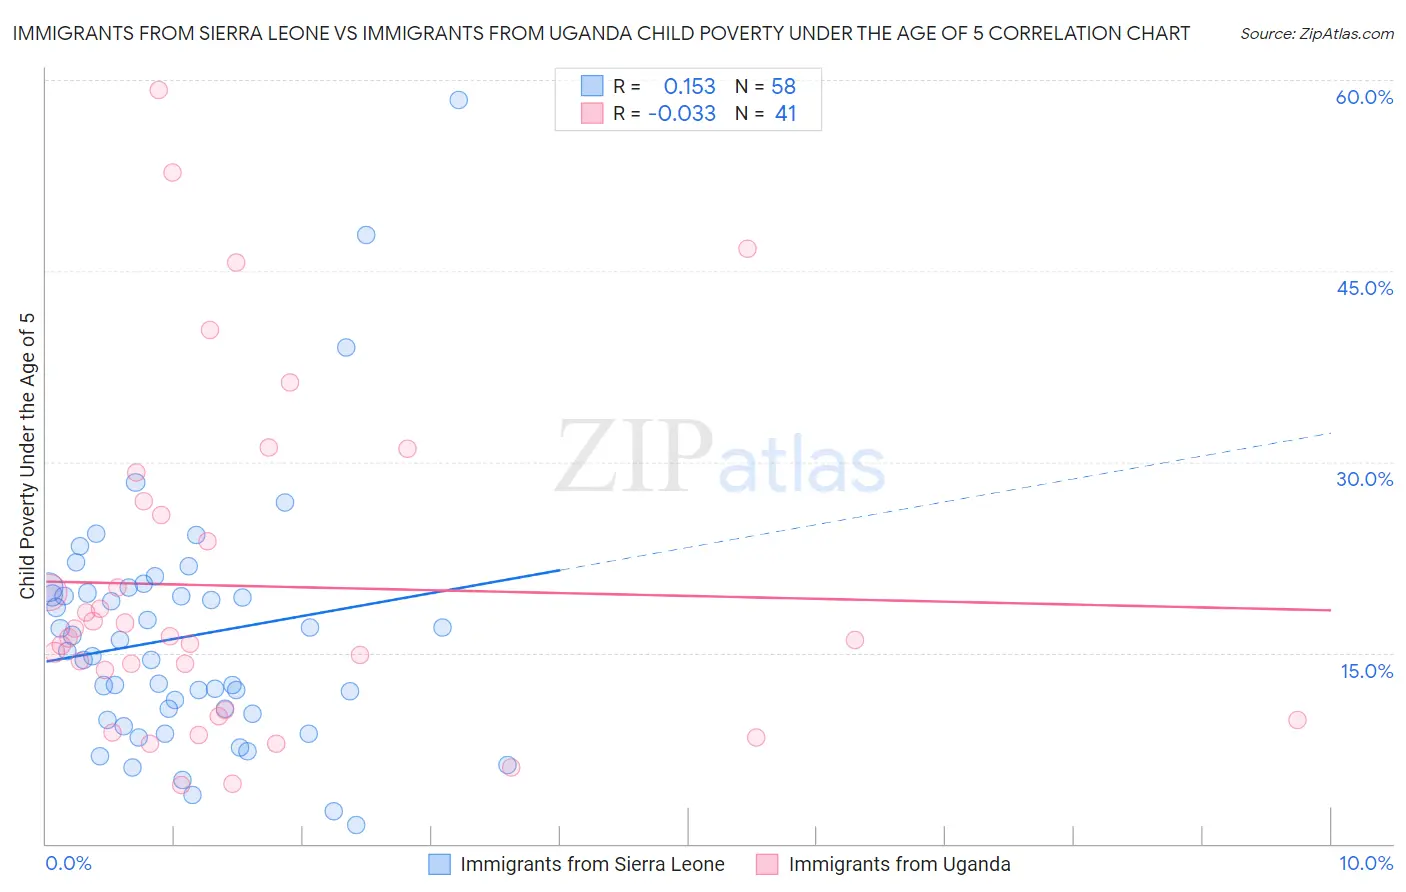 Immigrants from Sierra Leone vs Immigrants from Uganda Child Poverty Under the Age of 5